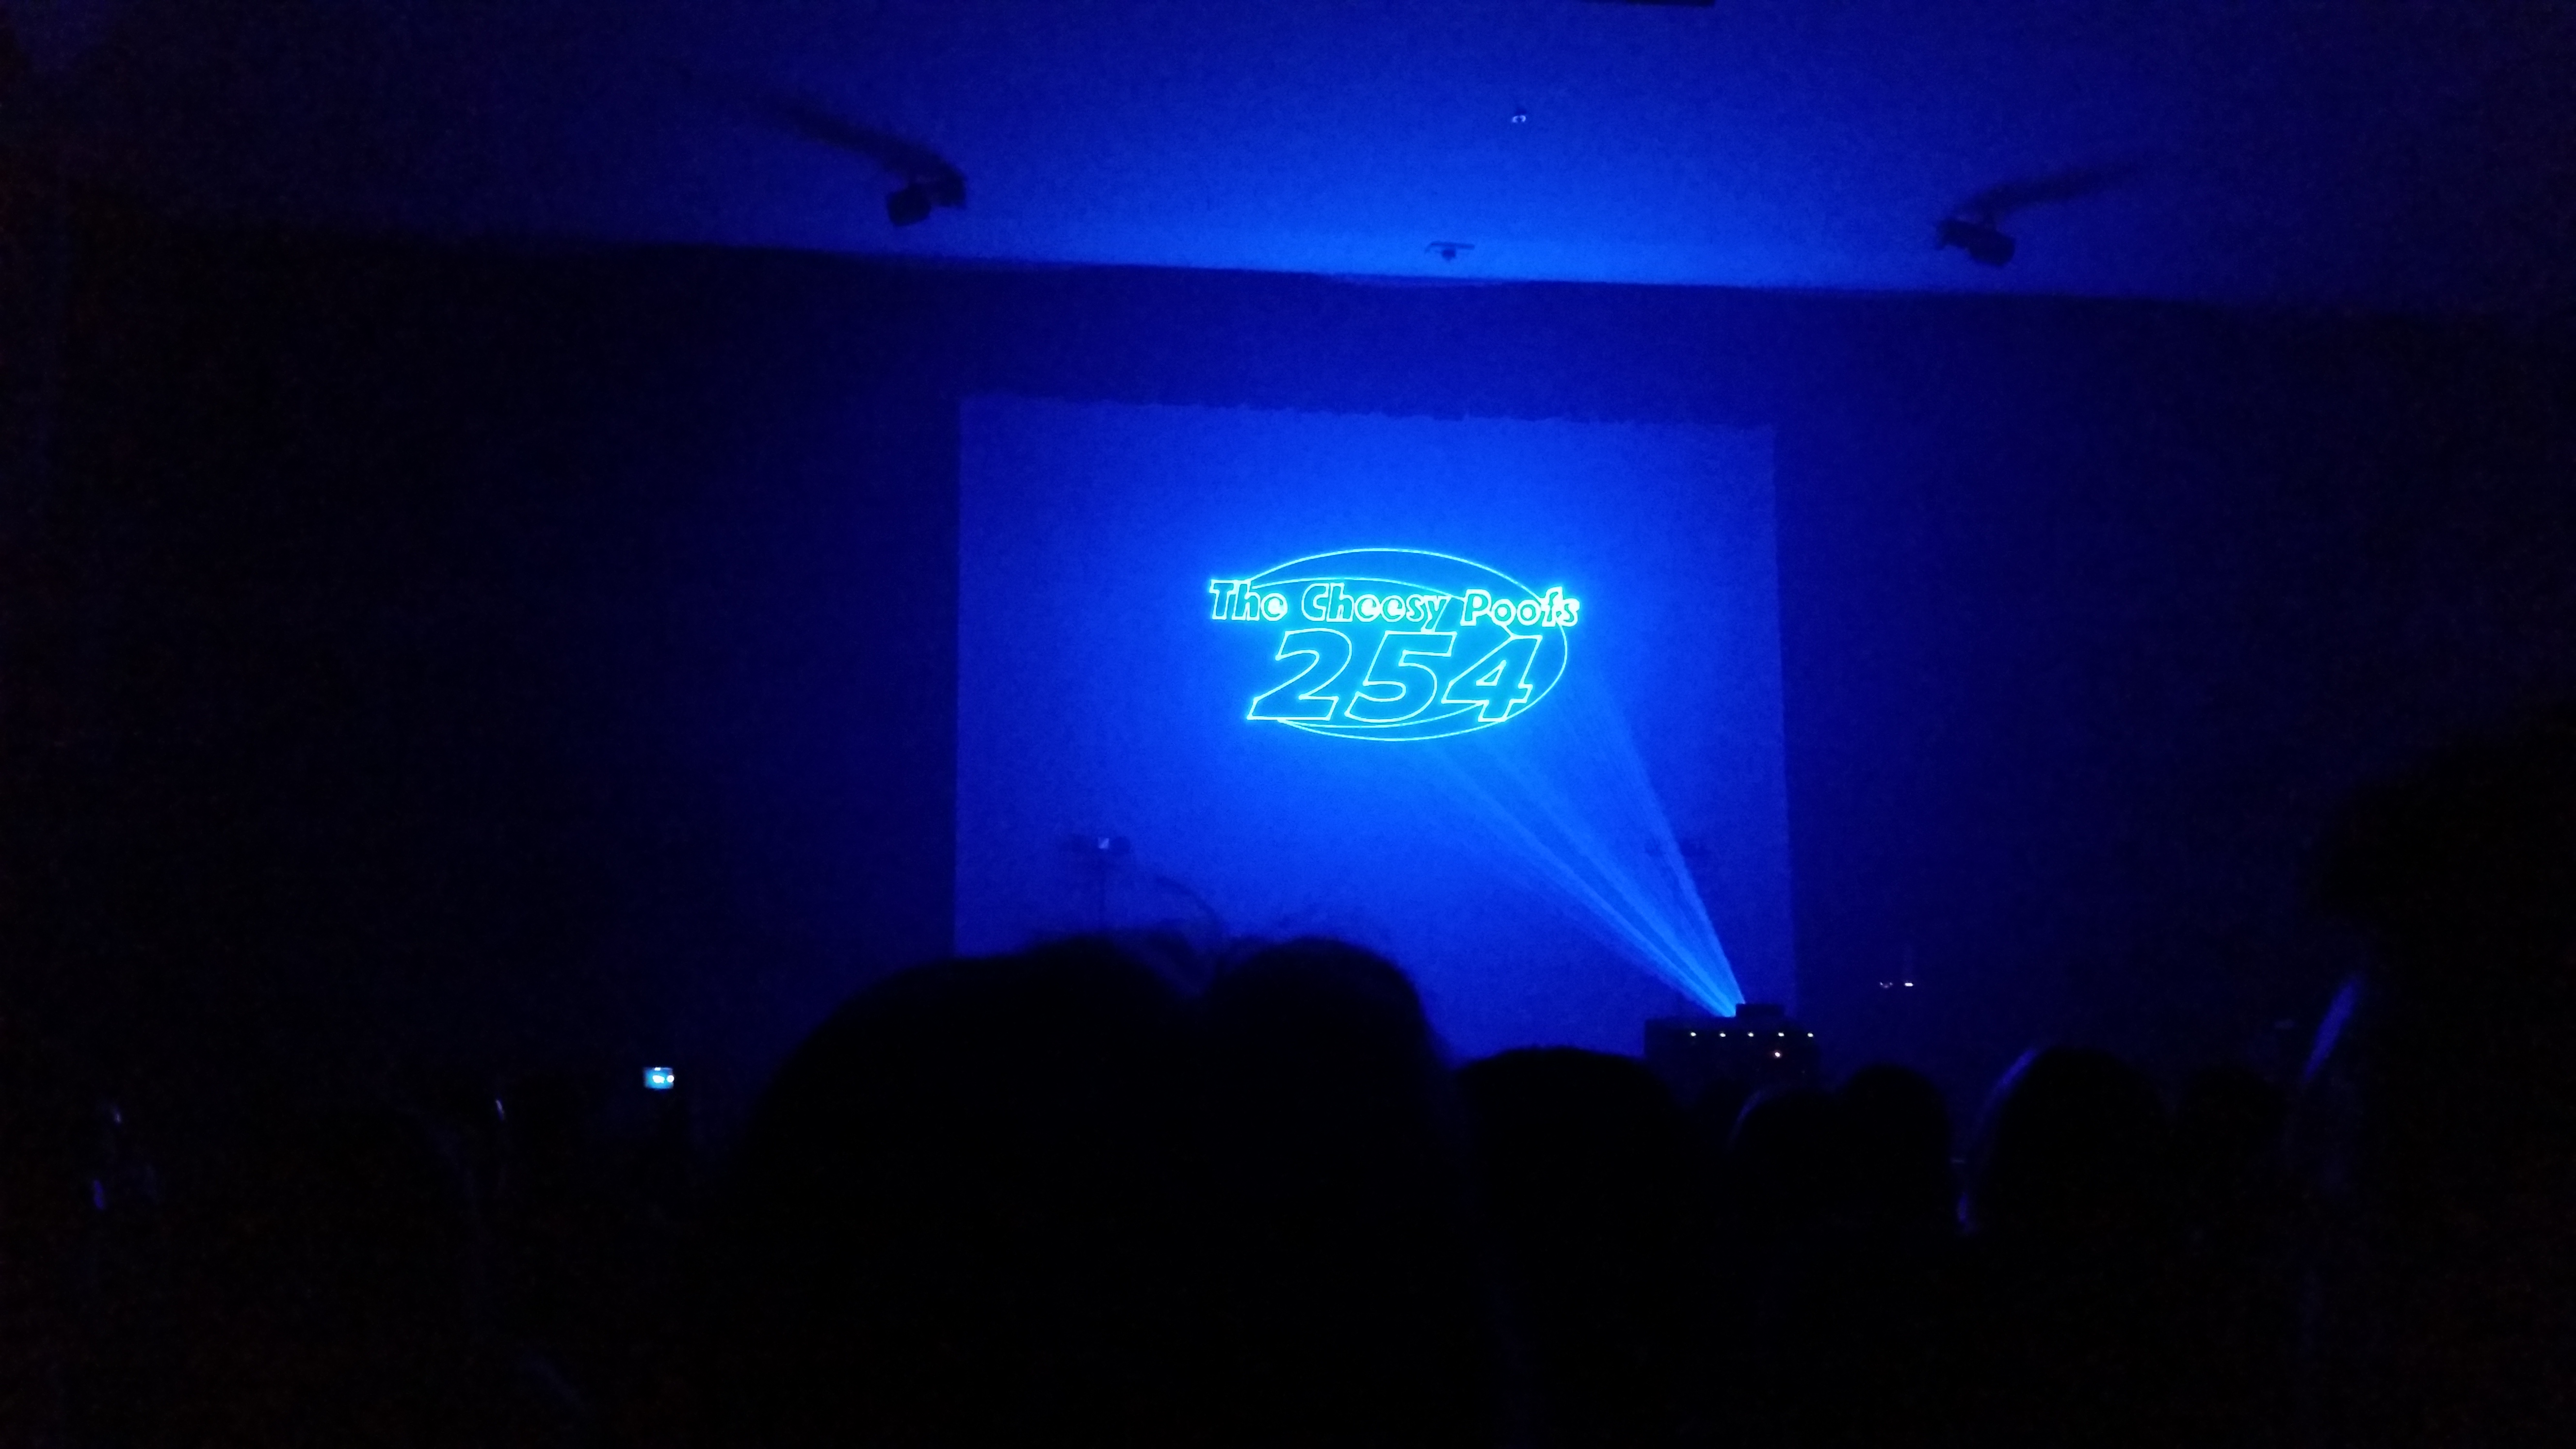 Friday night fun included an awesome laser show featuring 254's logo rearranging itself from 